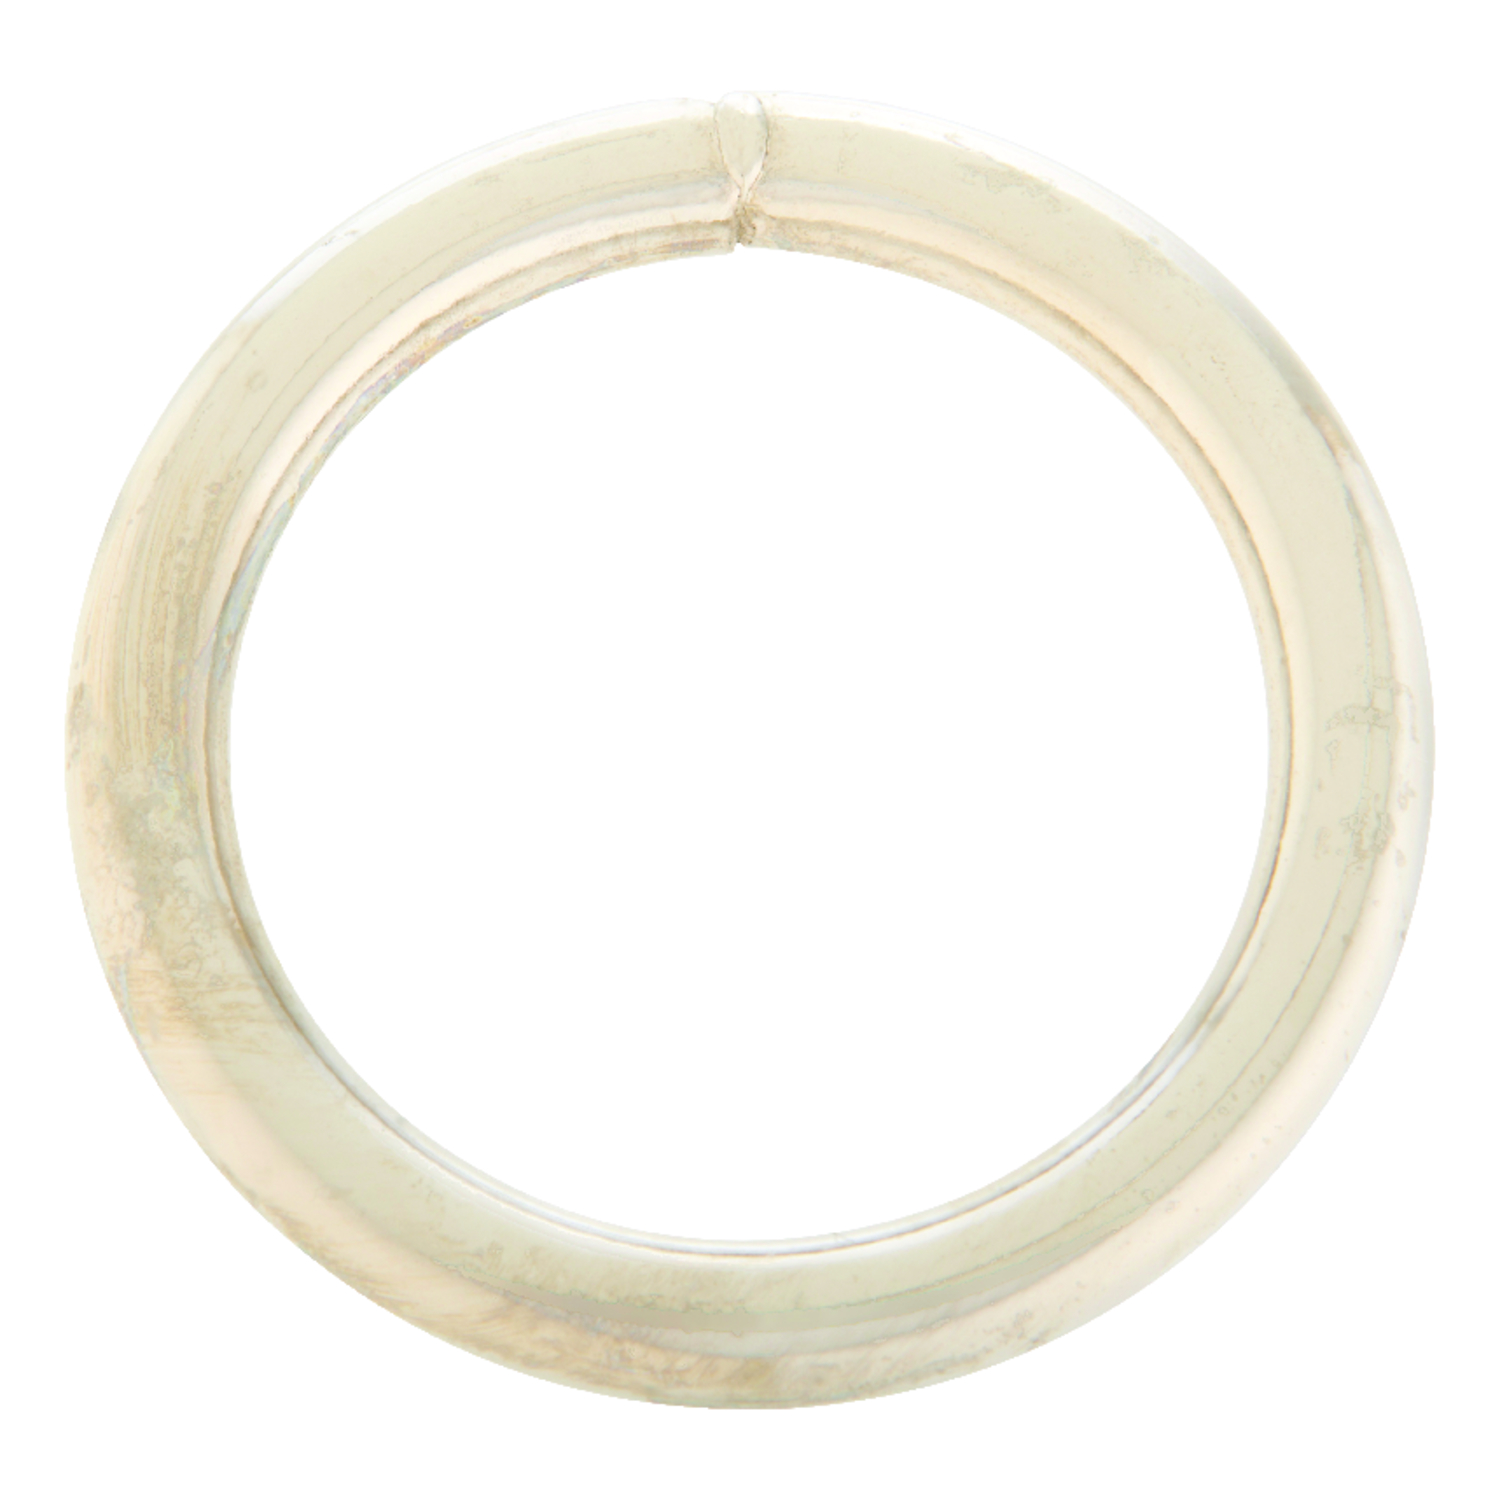 Campbell Nickel-Plated Steel Welded Ring 200 lb 1/4 in. L